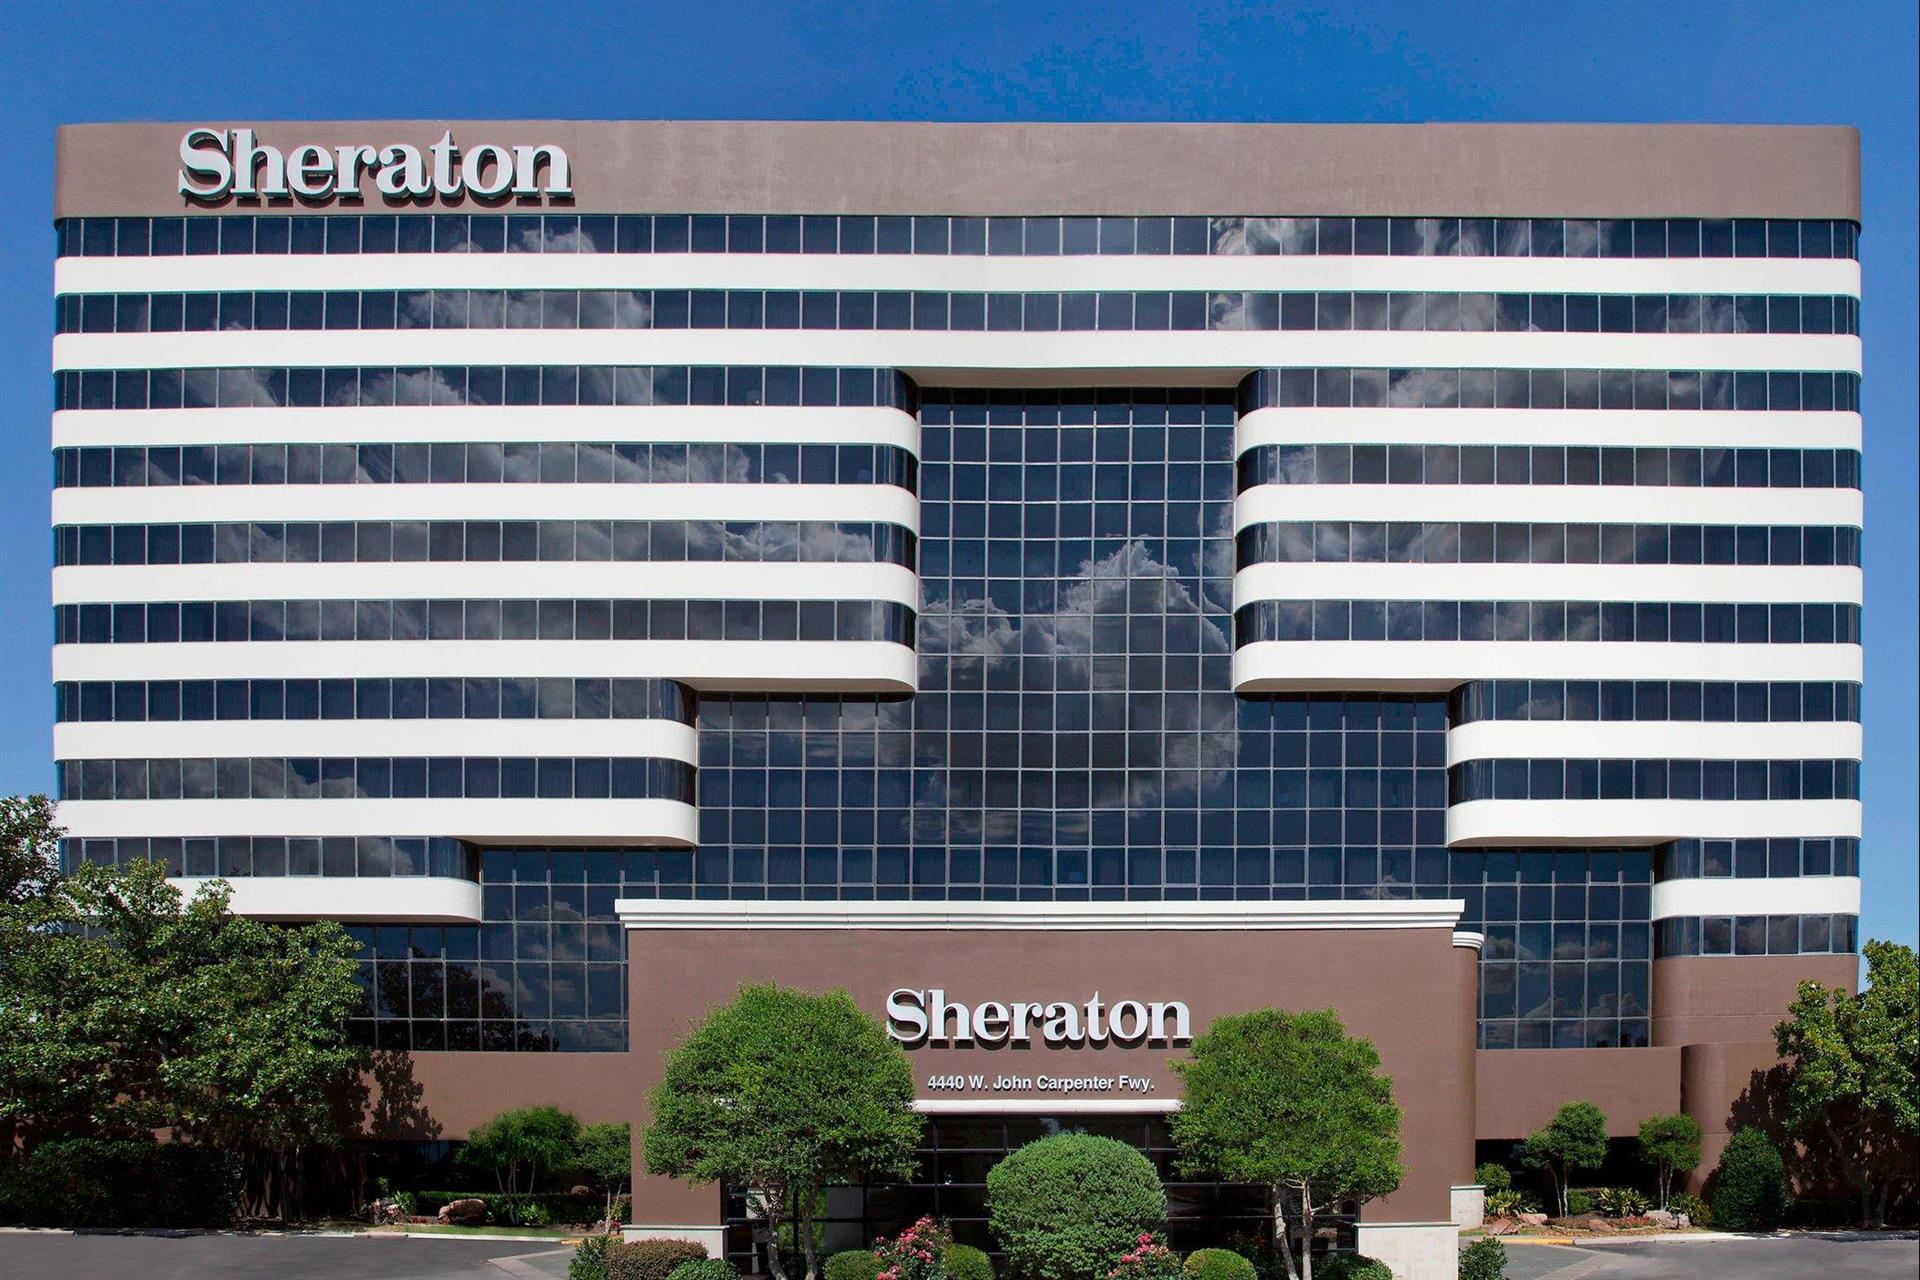 Sheraton DFW Airport Hotel in Irving, TX